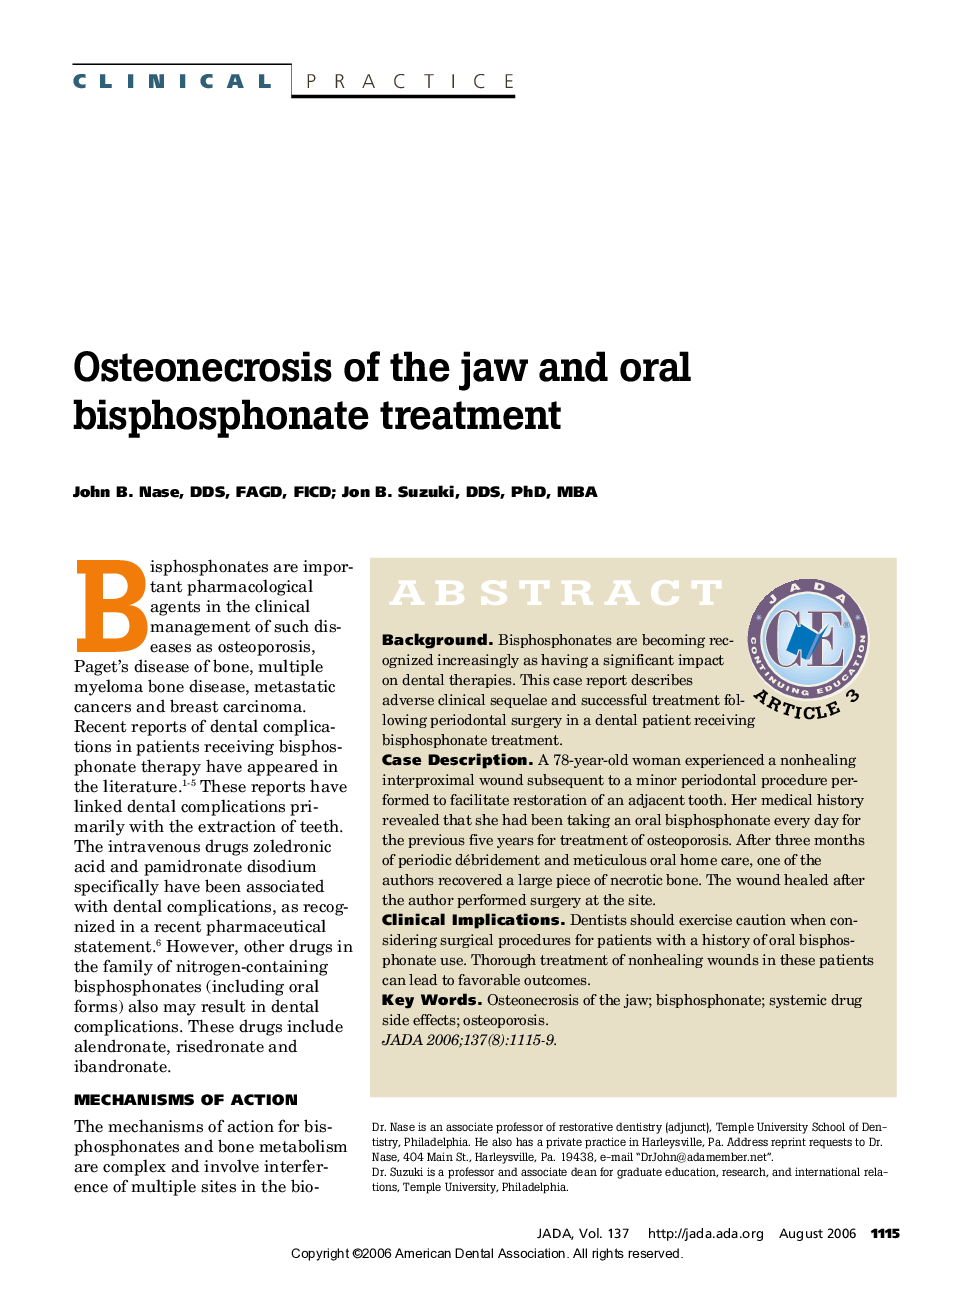 Osteonecrosis of the jaw and oral bisphosphonate treatment 